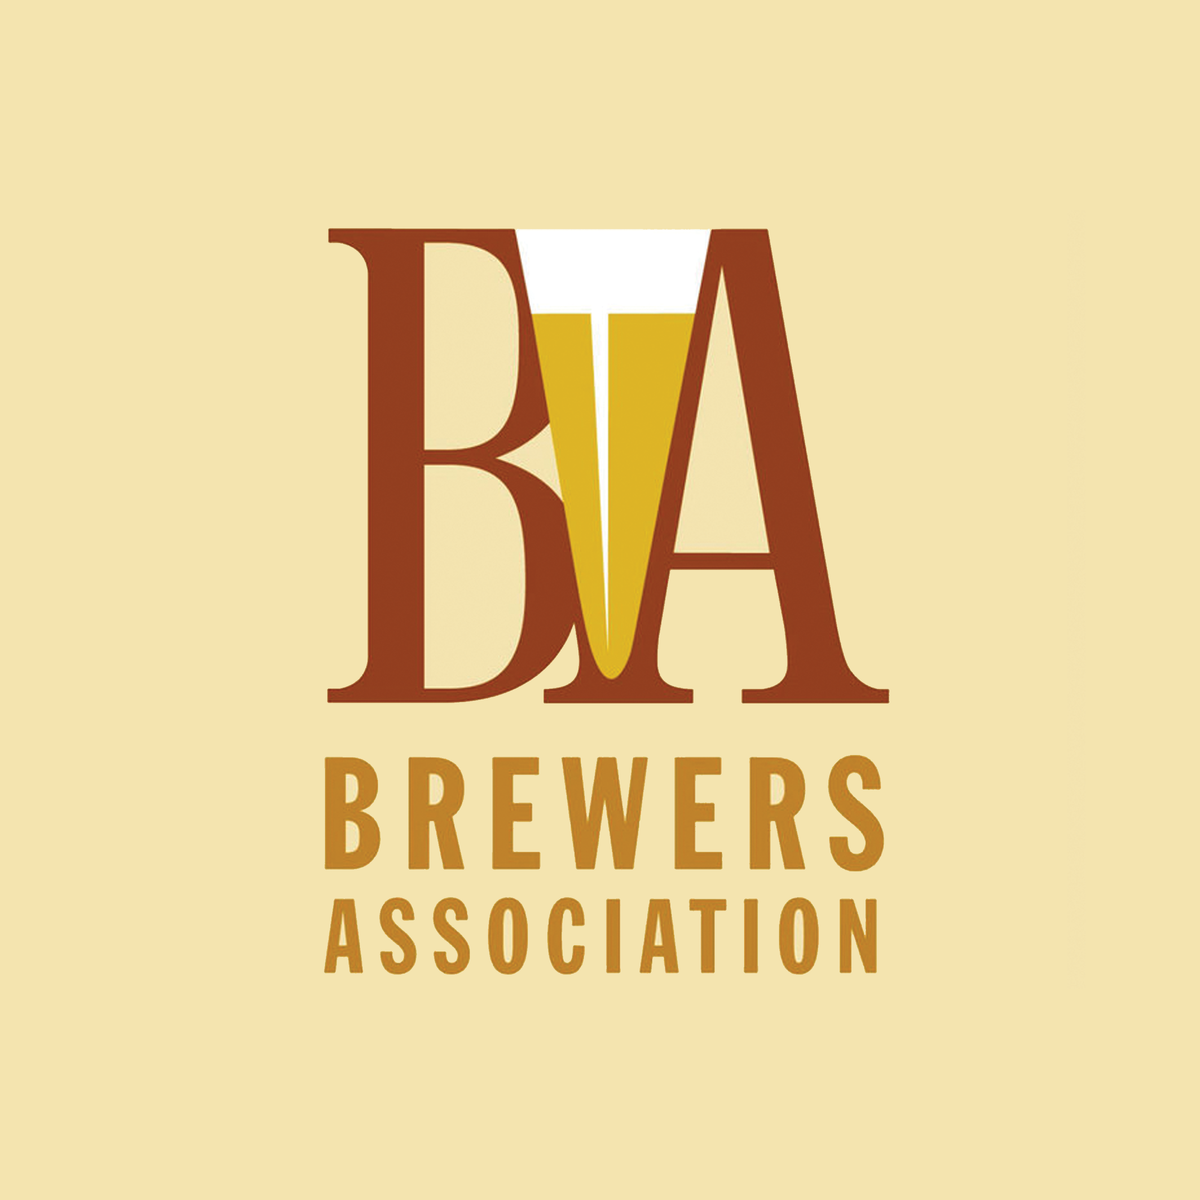 Brewers Association - The Common Beer Company